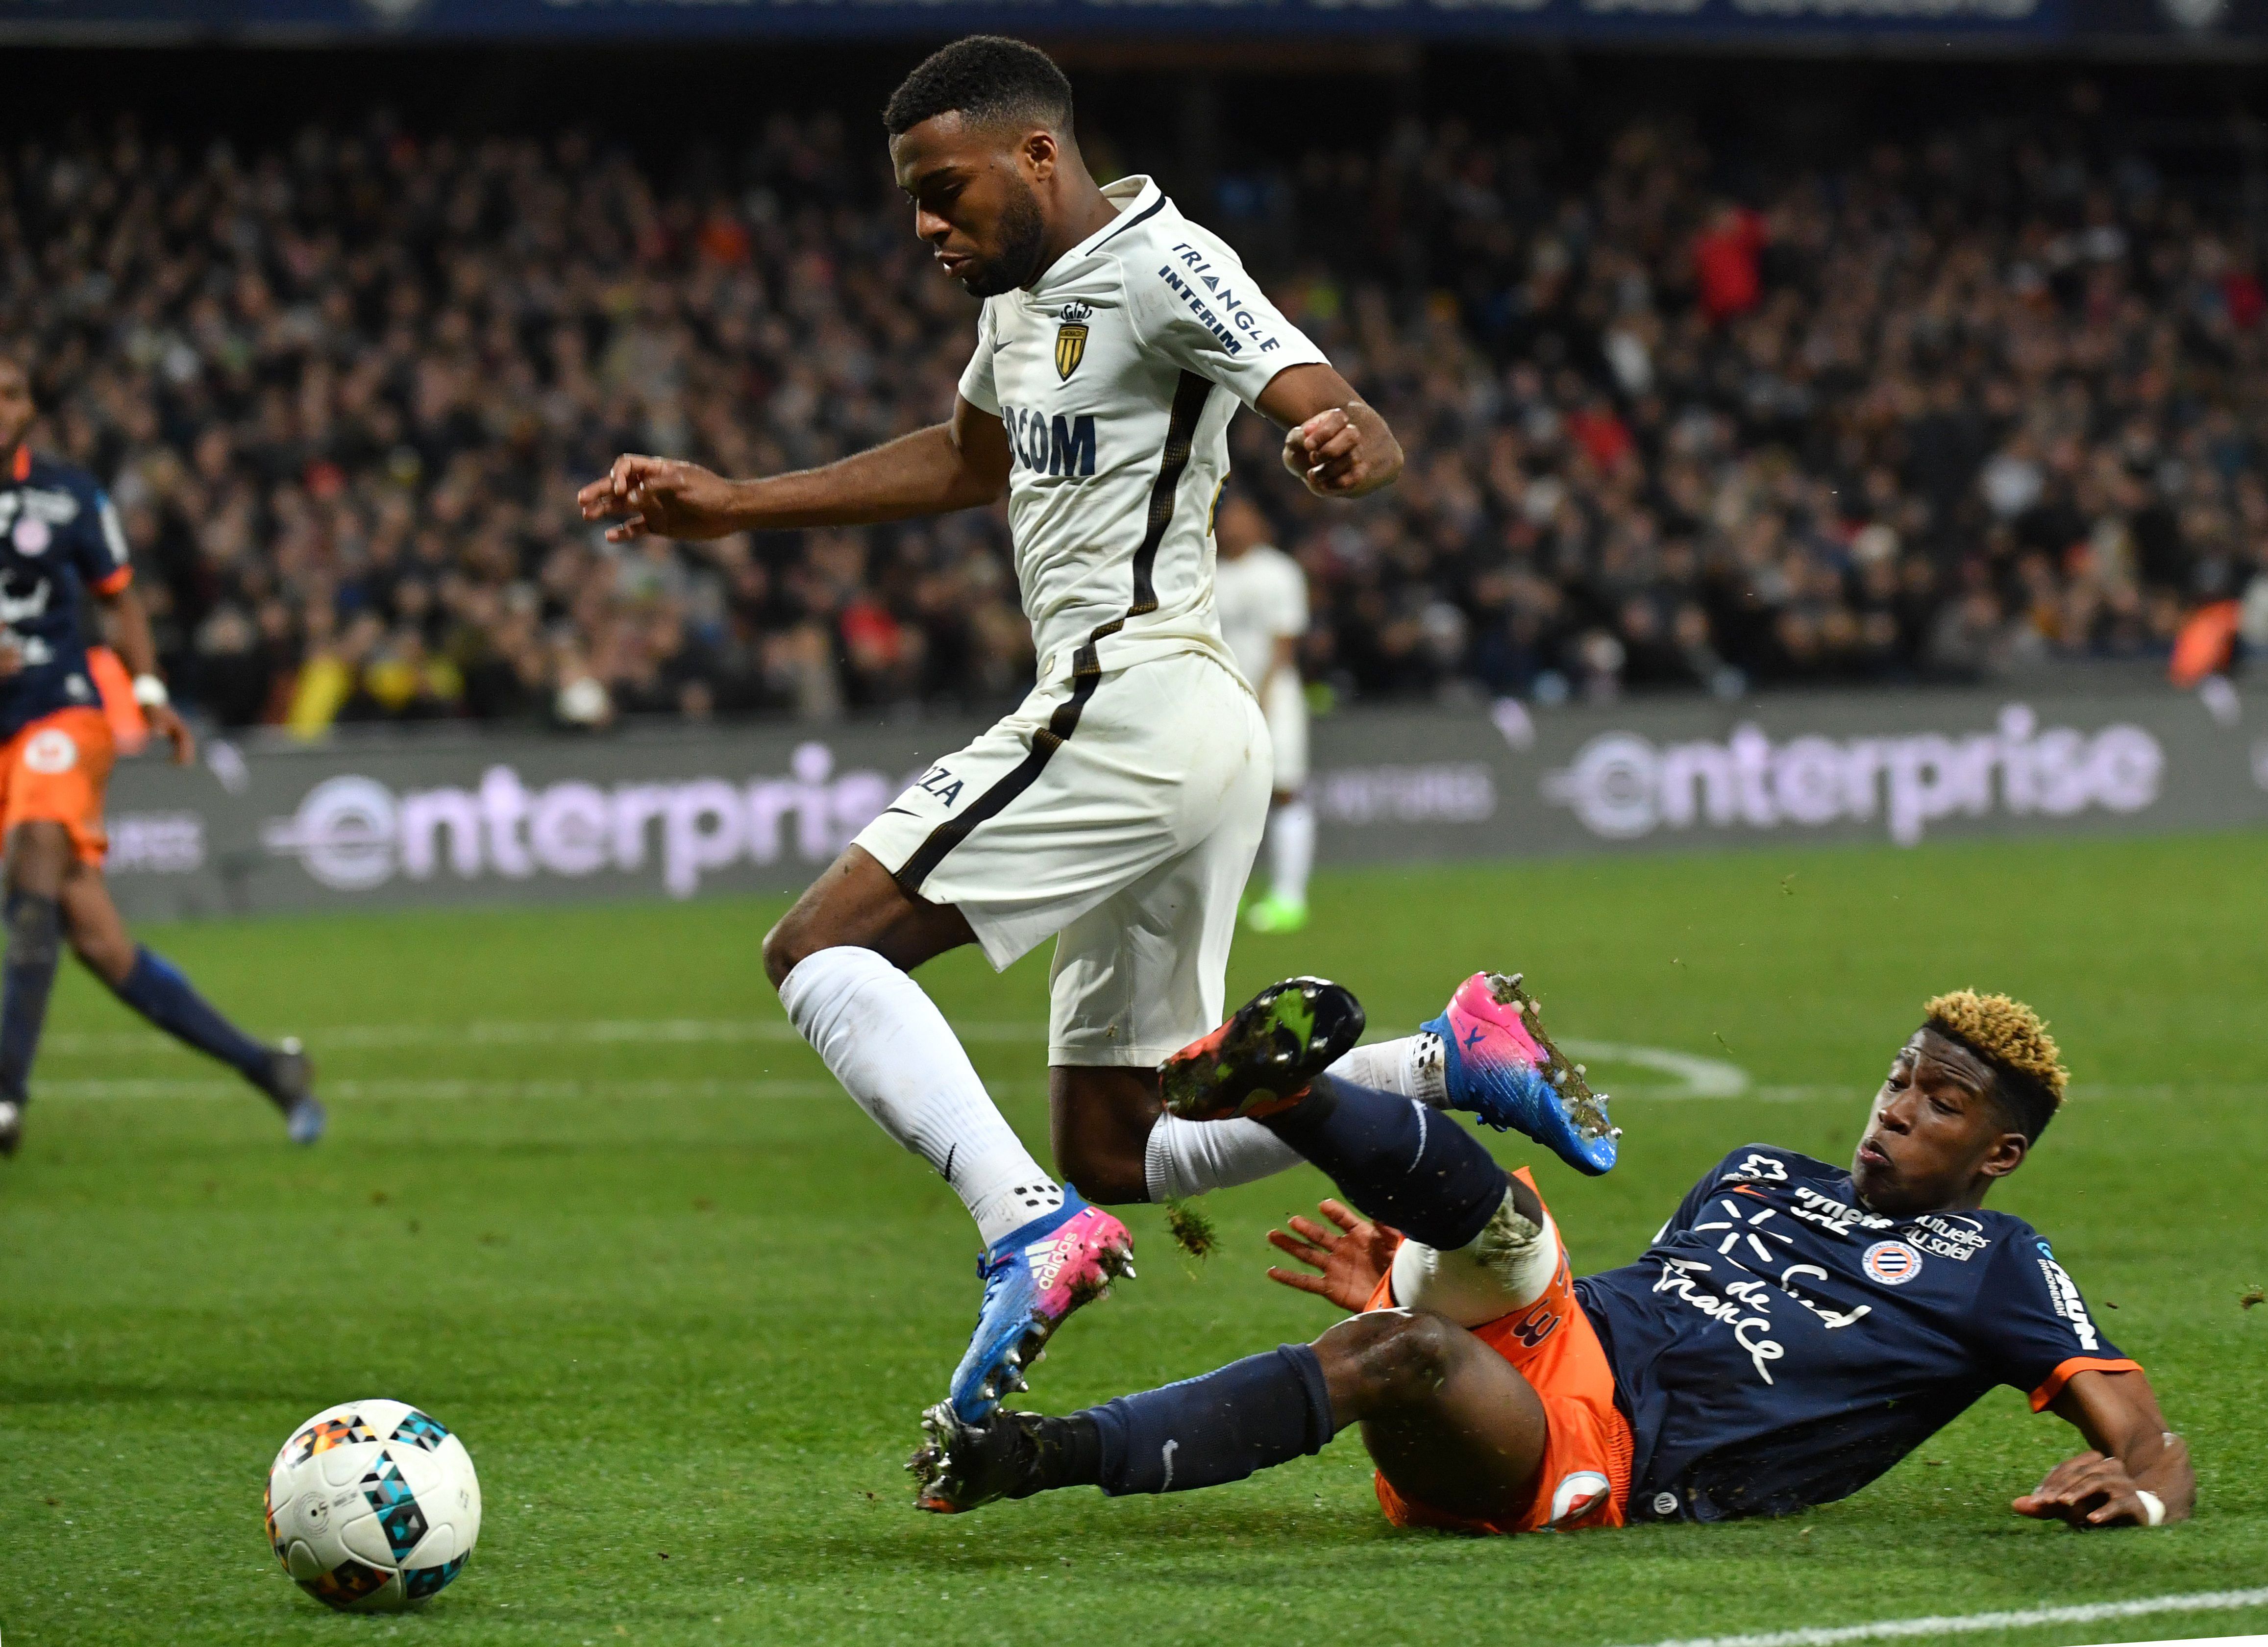 Monaco's French midfielder Thomas Lemar (L) vies with Montpellier's French defender Nordi Mukiele (R) during the French L1 football match between MHSC Montpellier and Monaco, on February 7, 2017 at the La Mosson Stadium in Montpellier, southern France. / AFP / PASCAL GUYOT        (Photo credit should read PASCAL GUYOT/AFP/Getty Images)